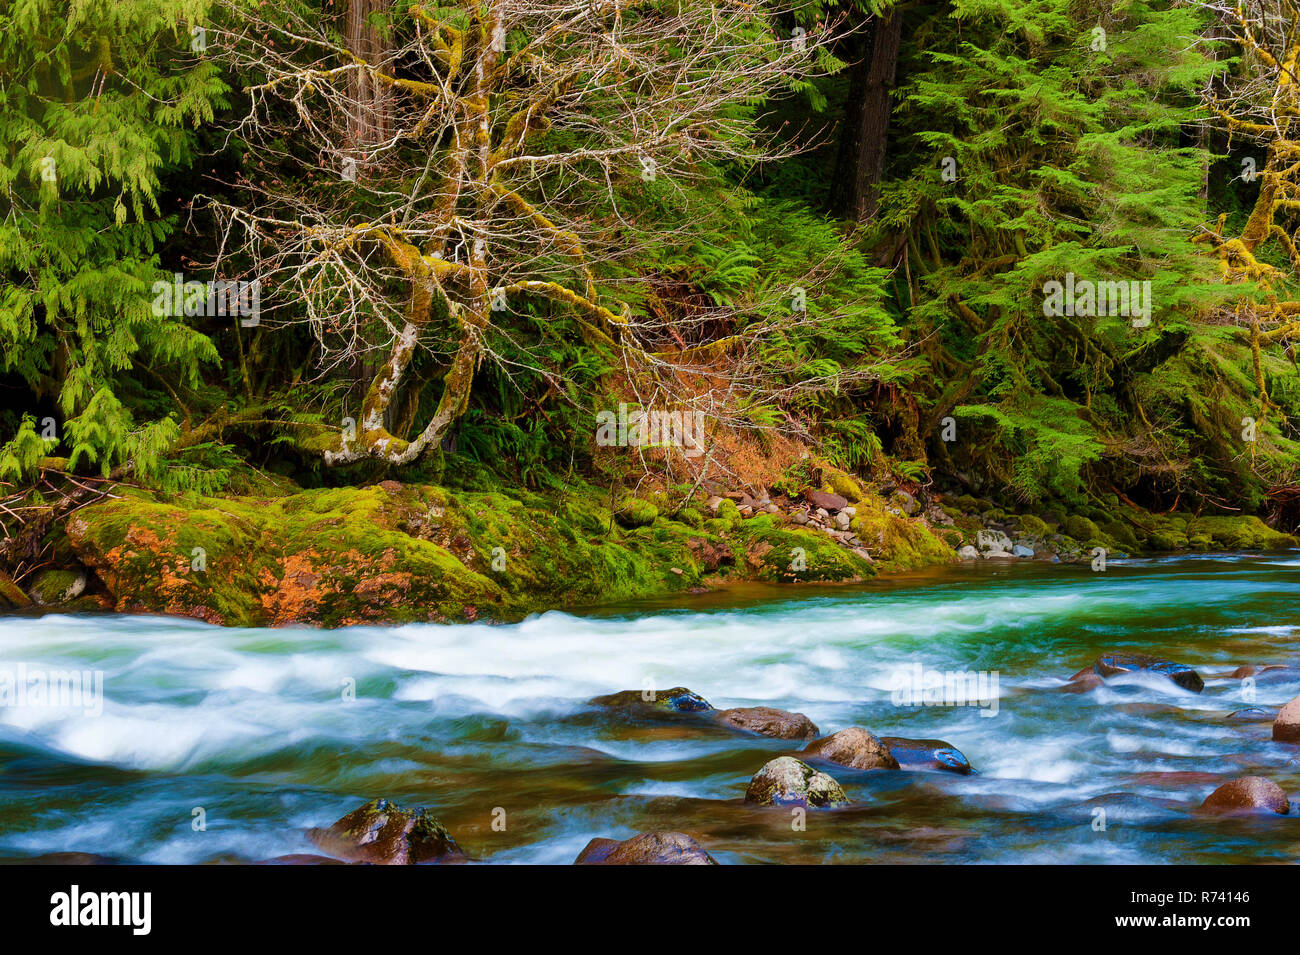 Tranquil scene along the banks of the Salmon River in Mt. Hood National Forest Stock Photo